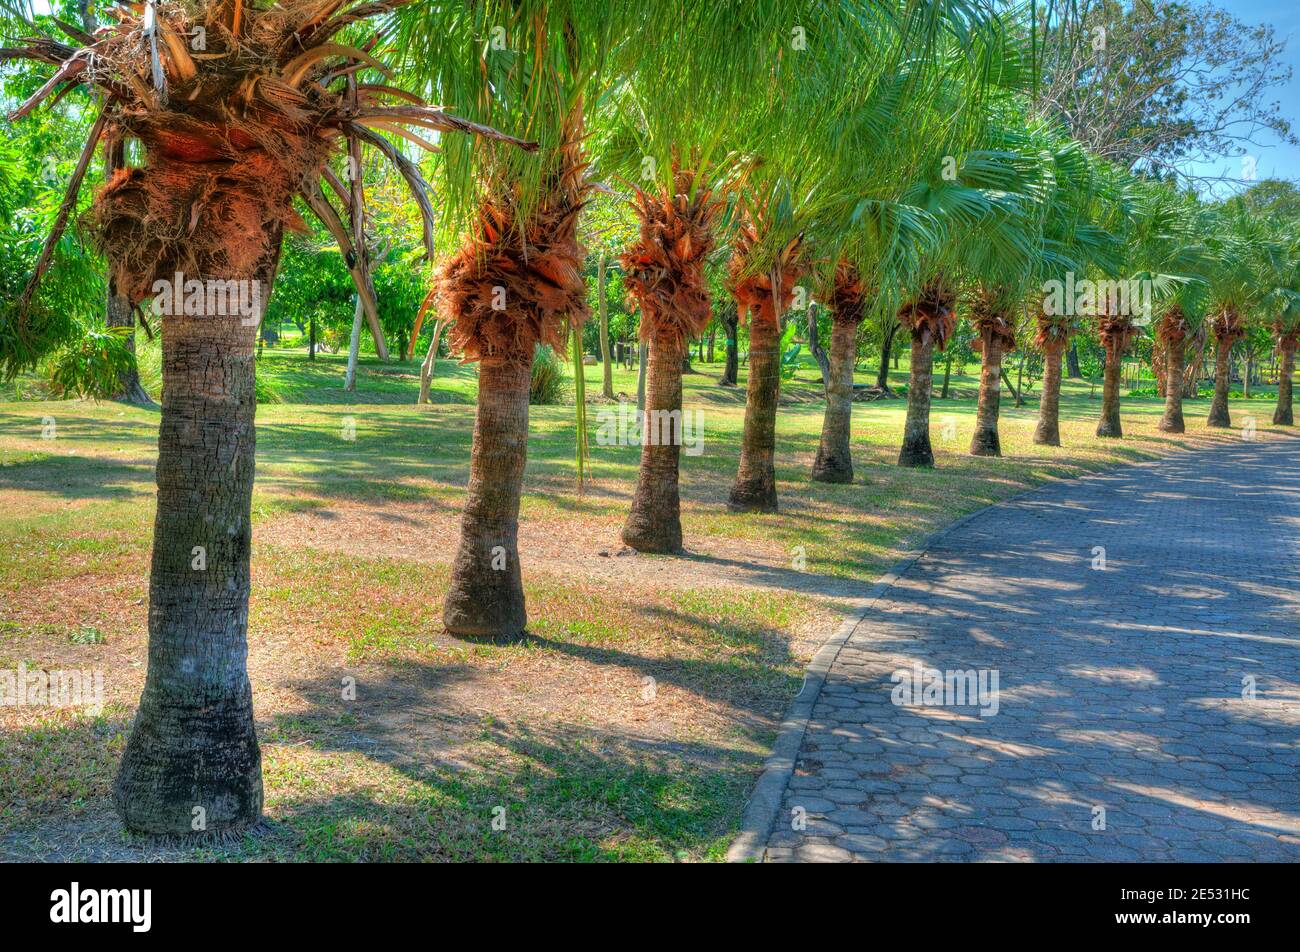 Coconut Trees in Line in a Park  (in high dynamic range) Stock Photo